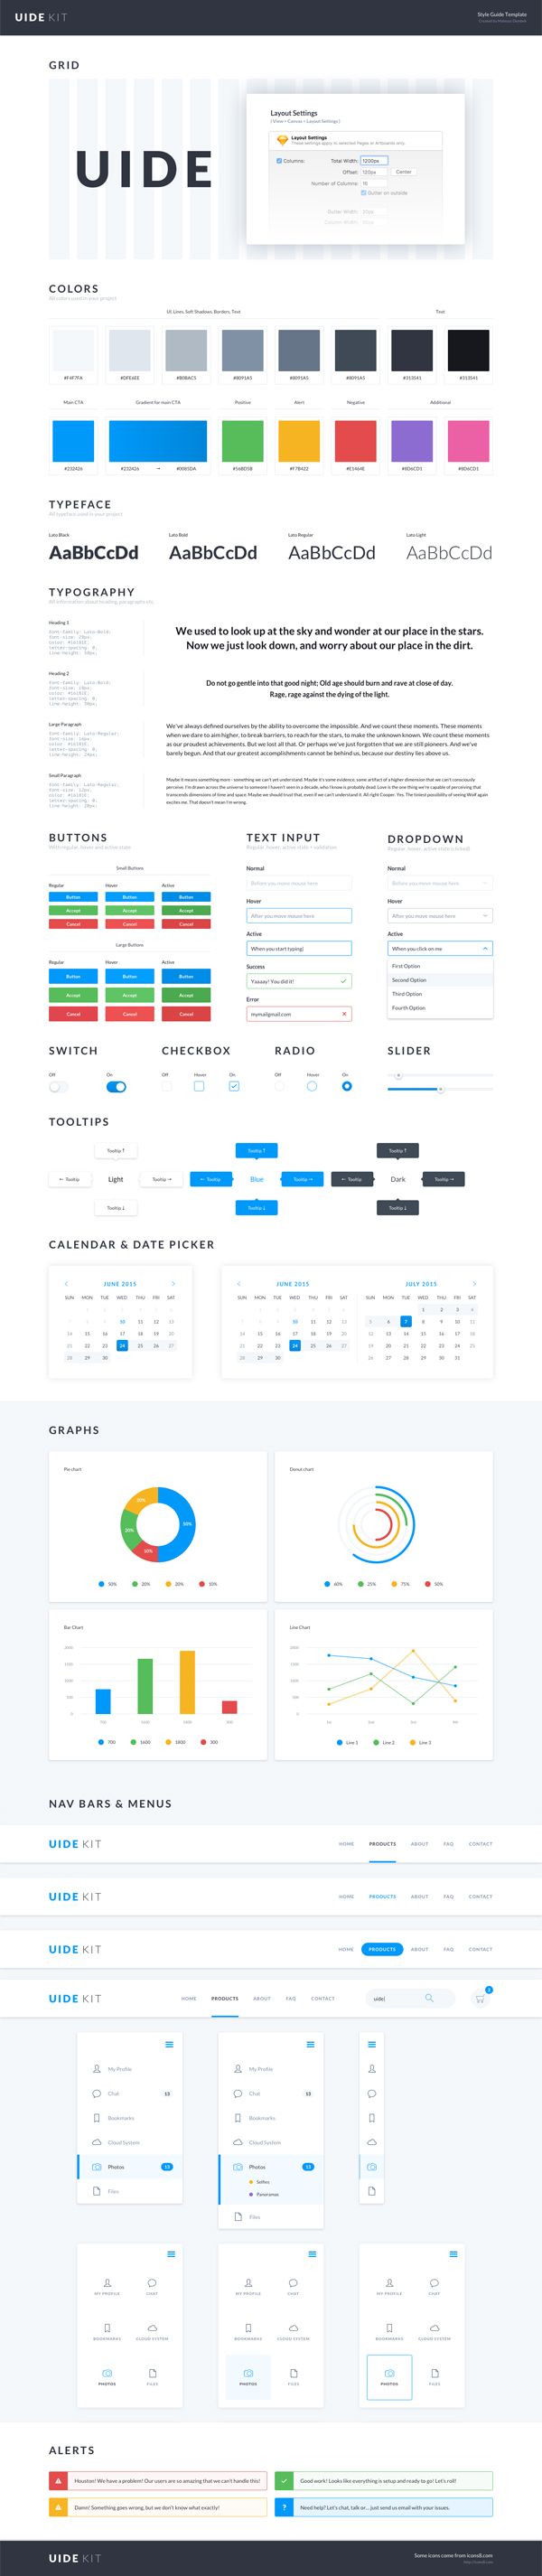 Free UIDE Kit (Style Guide Template)